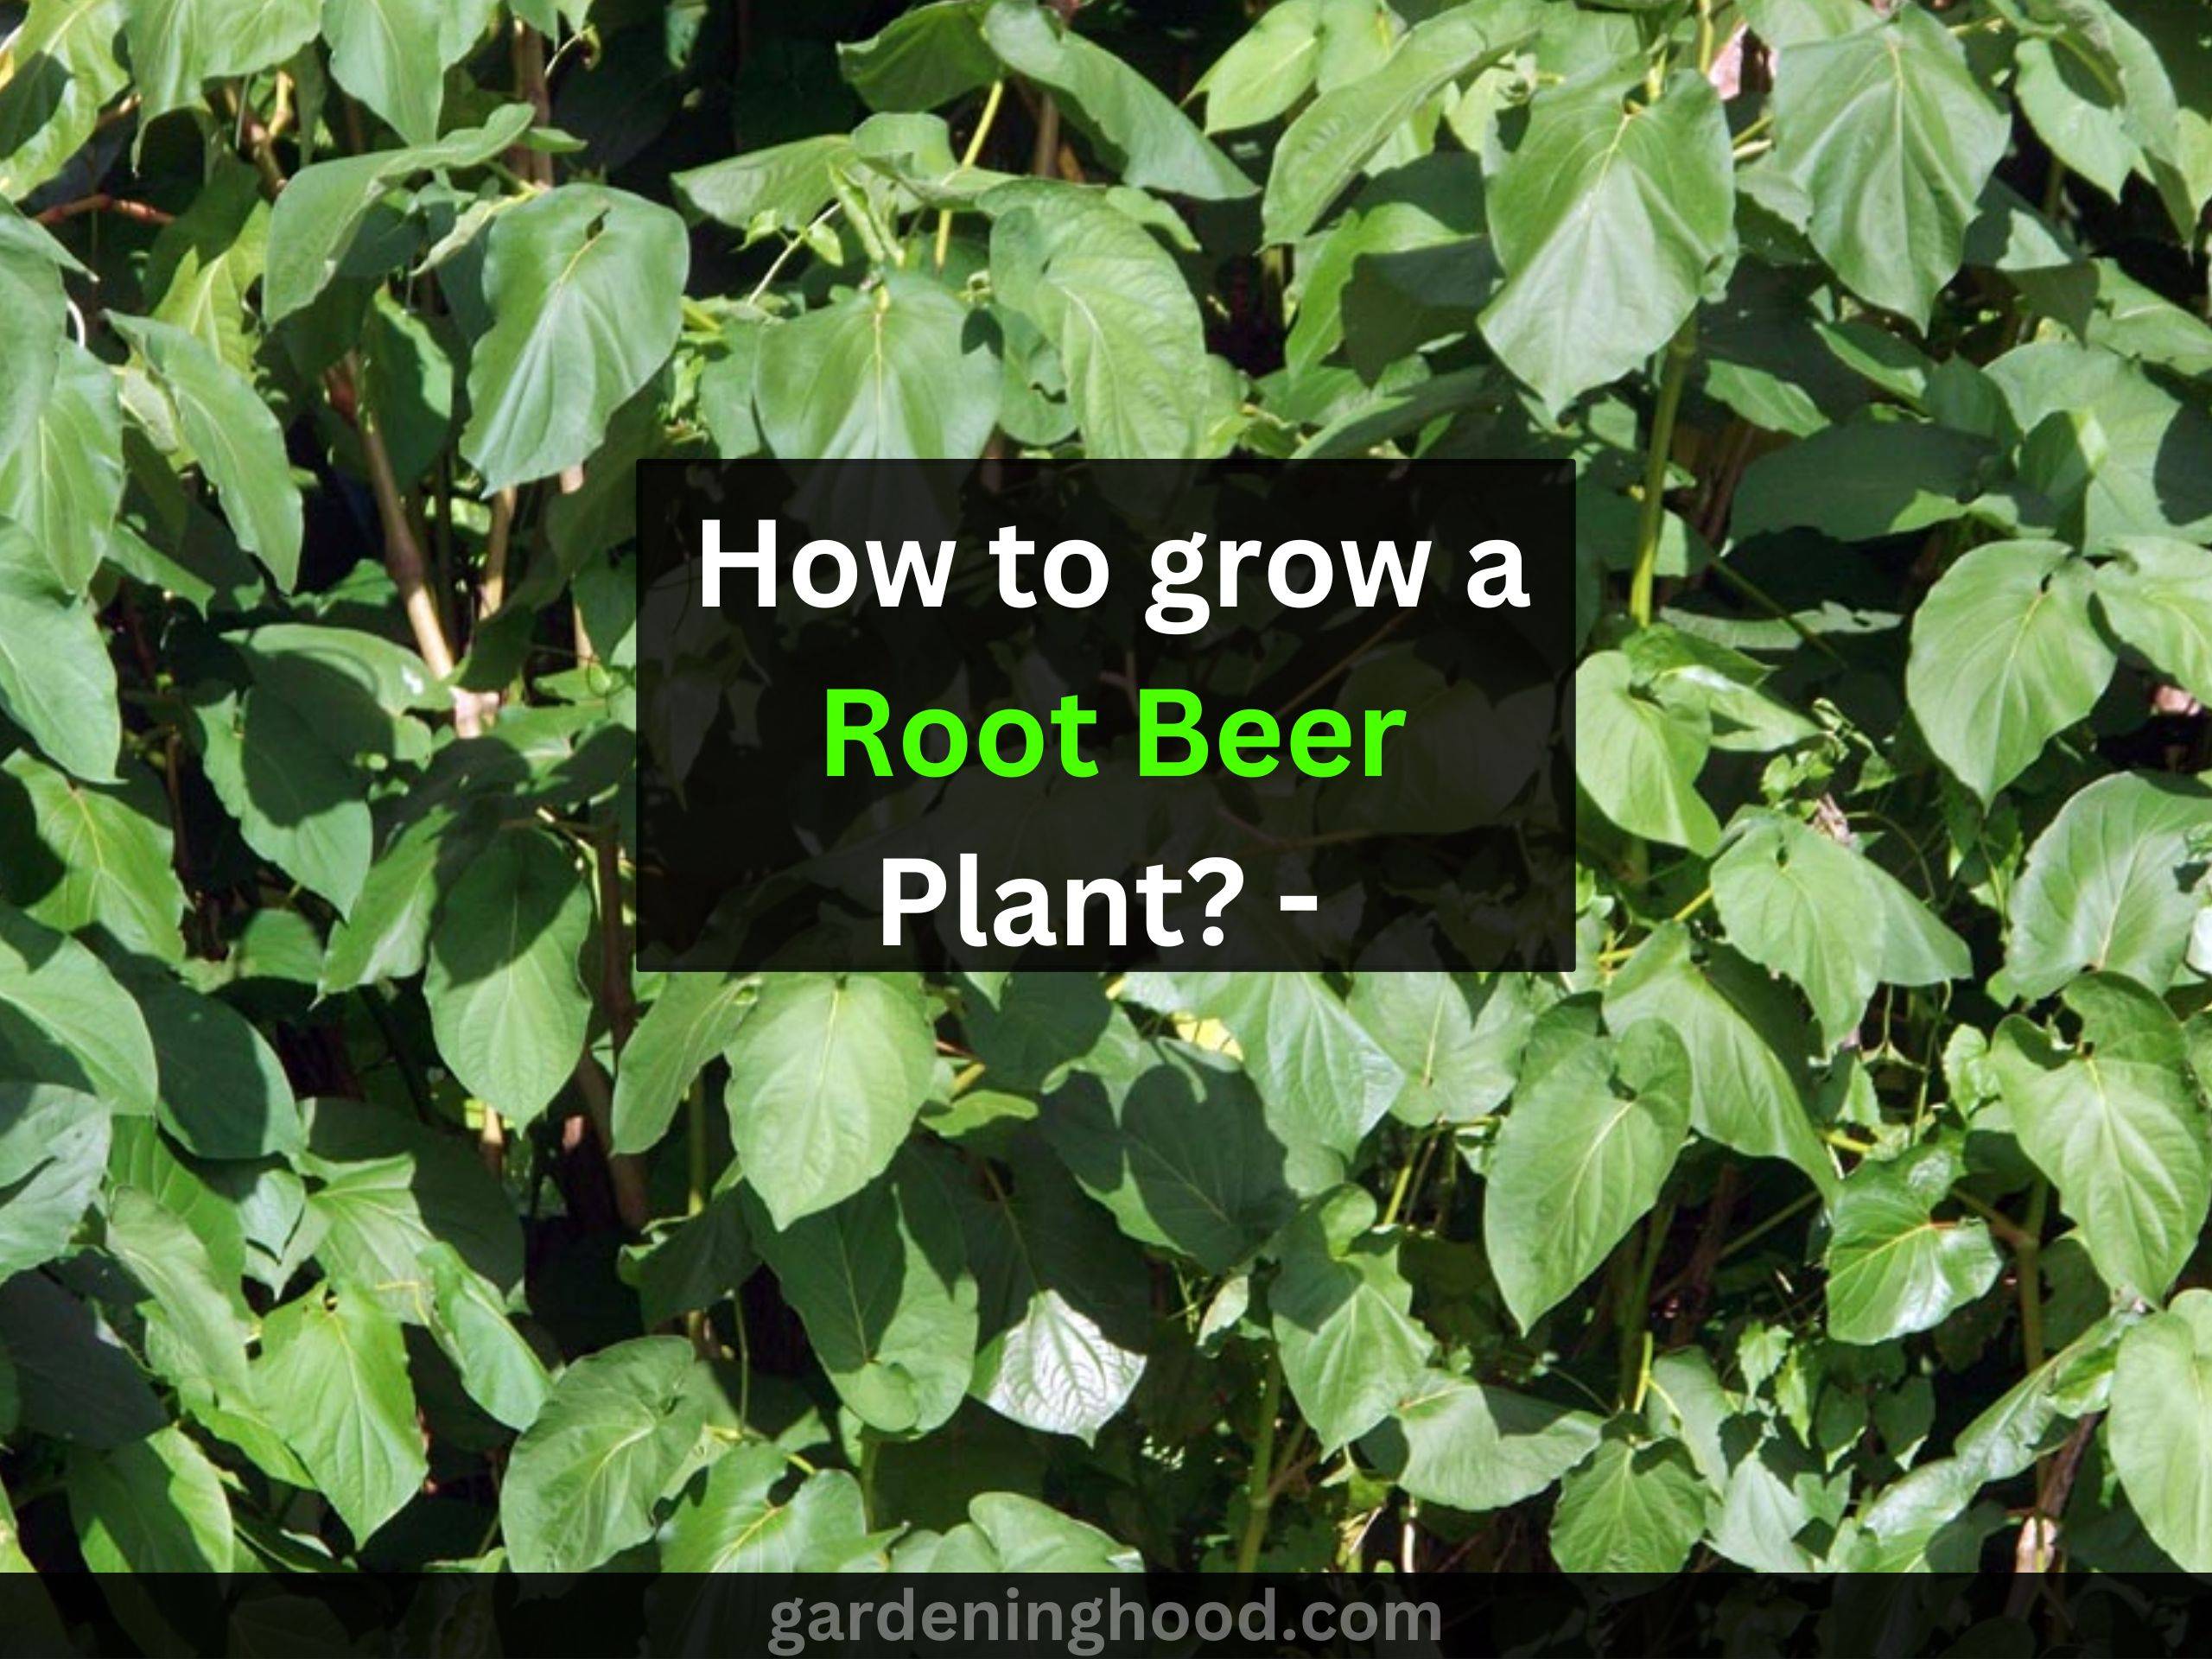 How to grow a Root Beer Plant? - Propagate Mexican Pepperleaf, Medical Uses, and Benefits